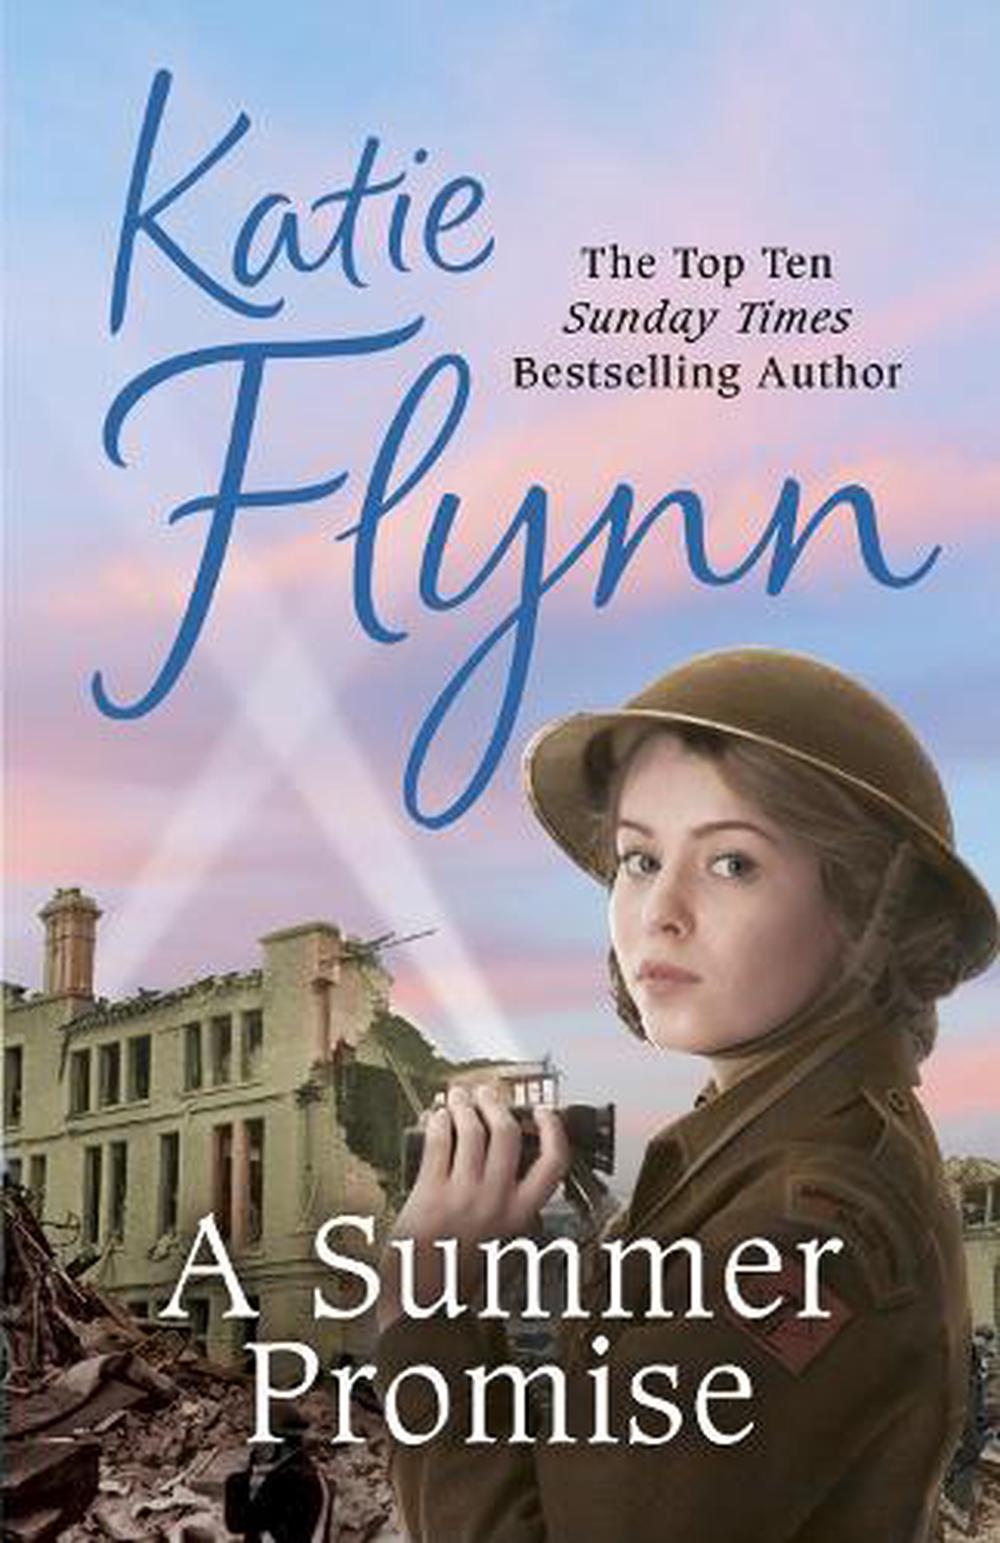 Summer Promise by Katie Flynn, Paperback, 9780099591023 Buy online at